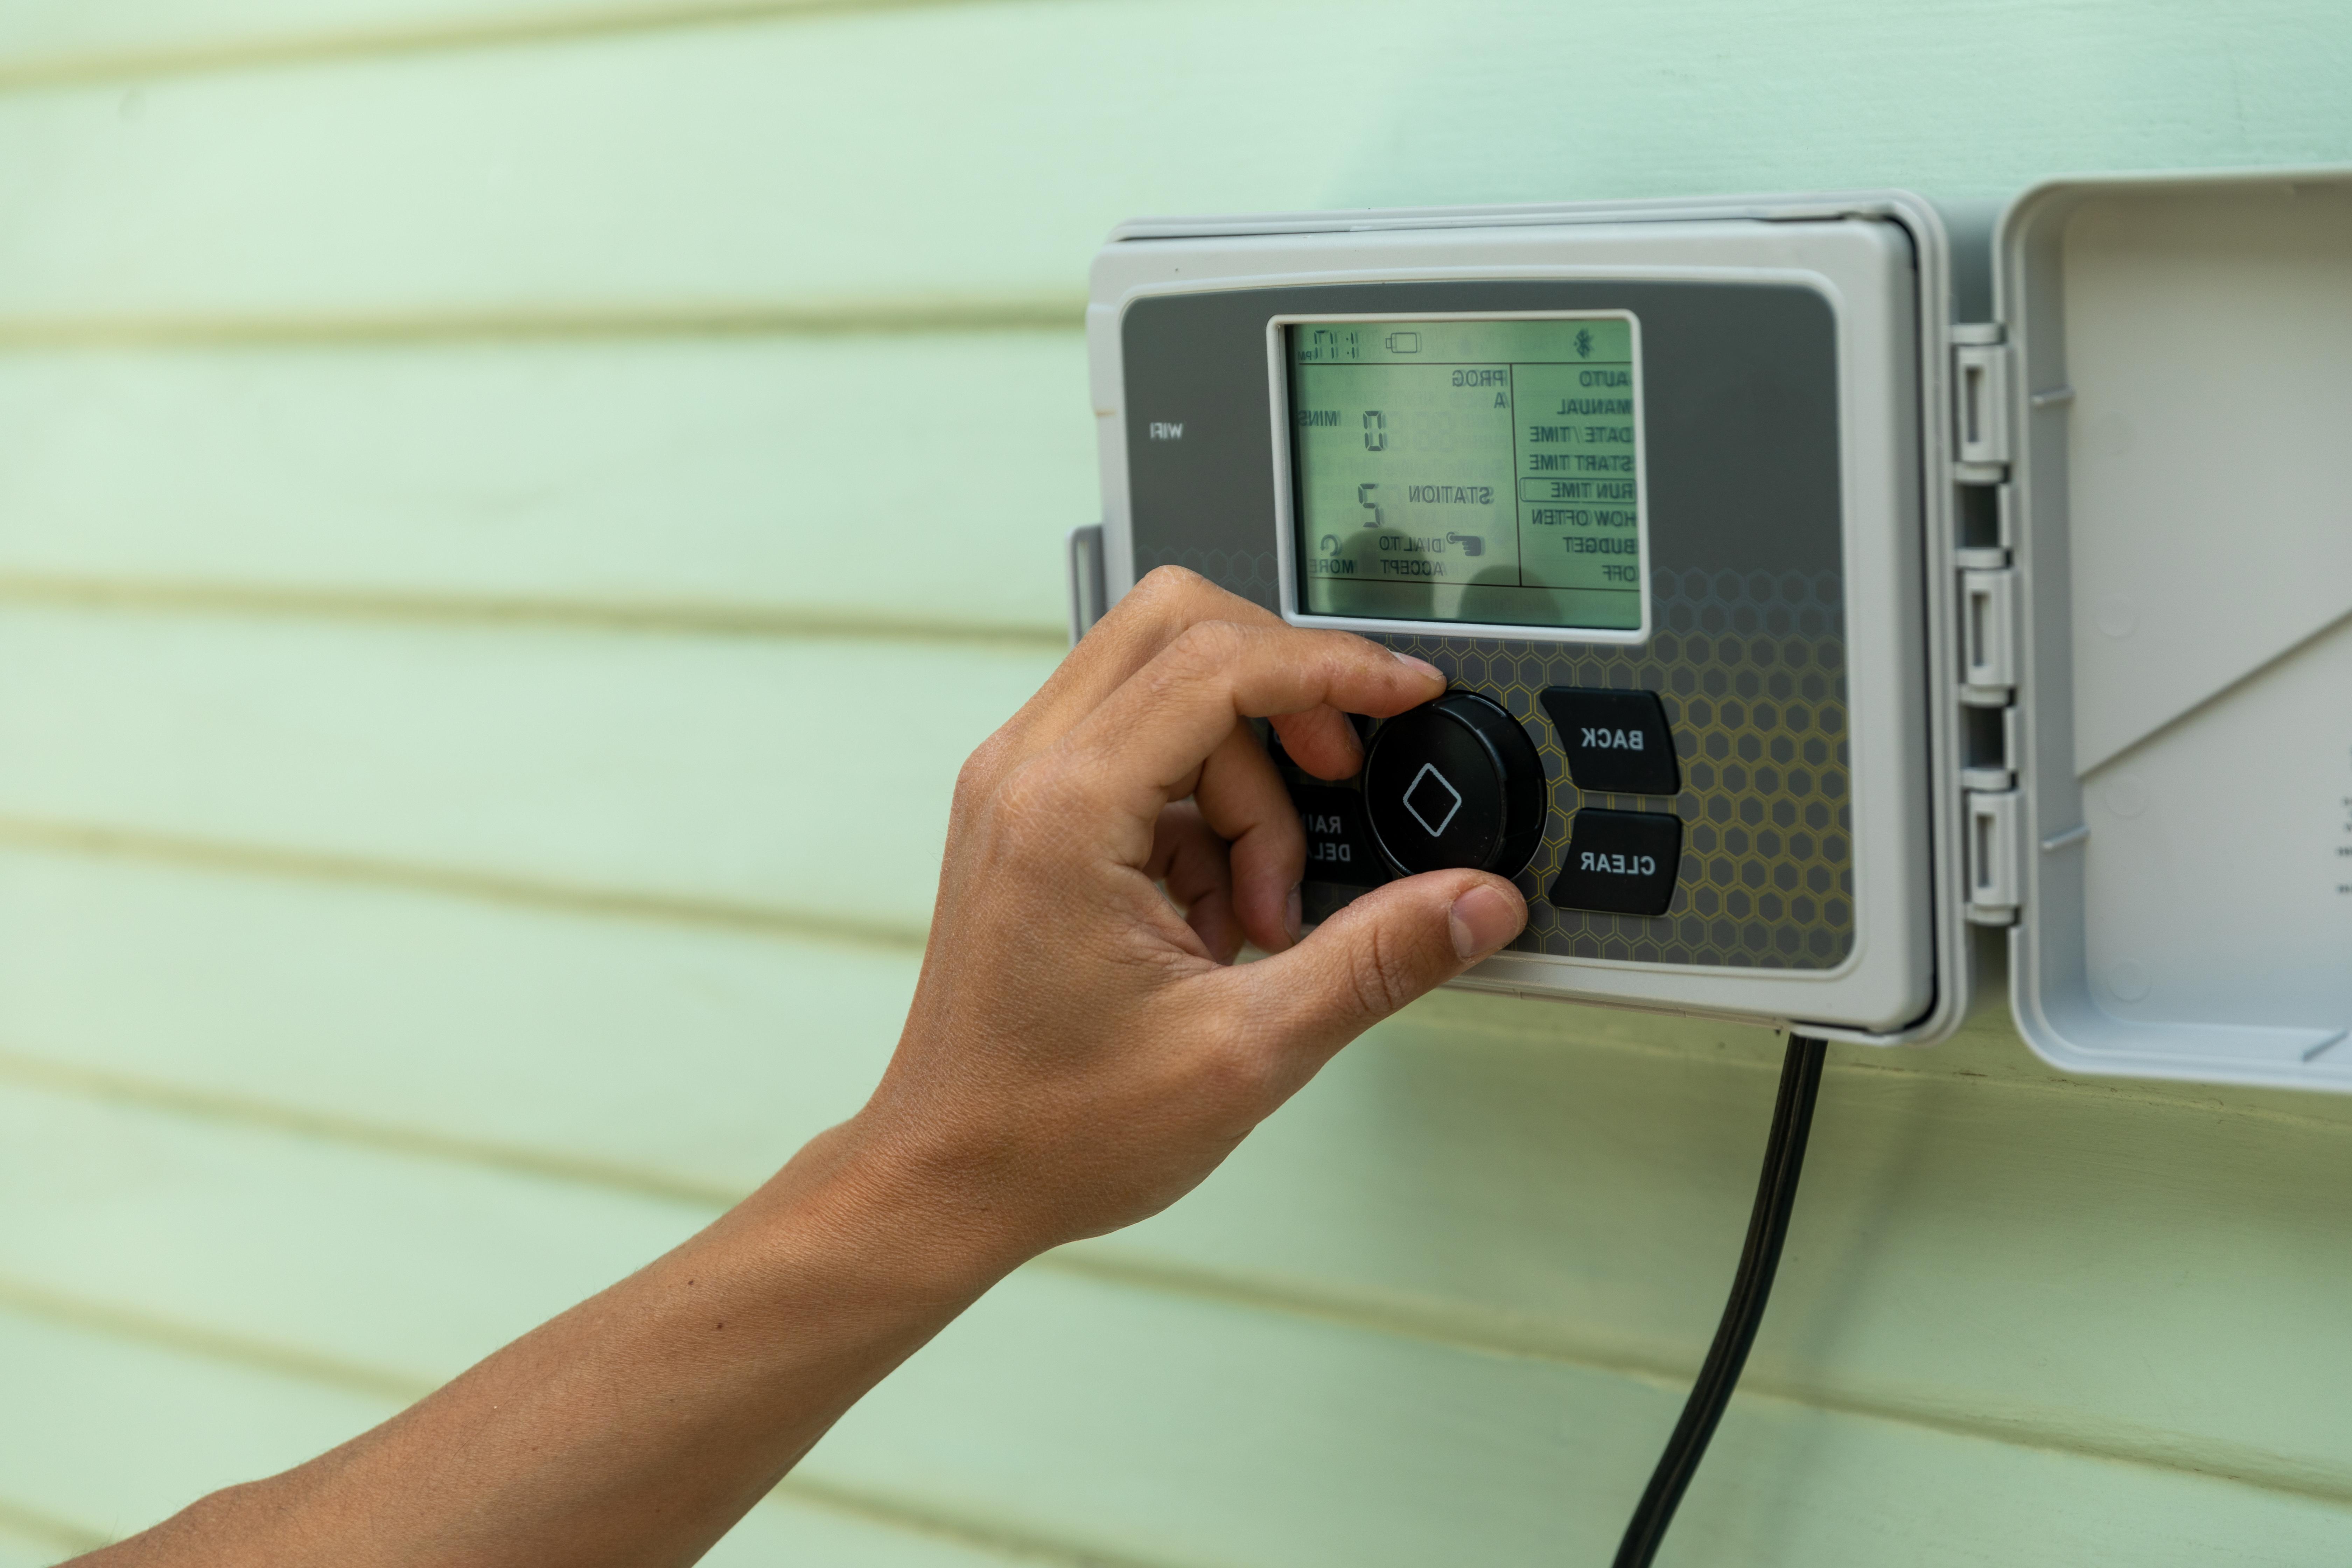 A person adjusts a smart sprinkler controller provided as a part of a water conservation program.